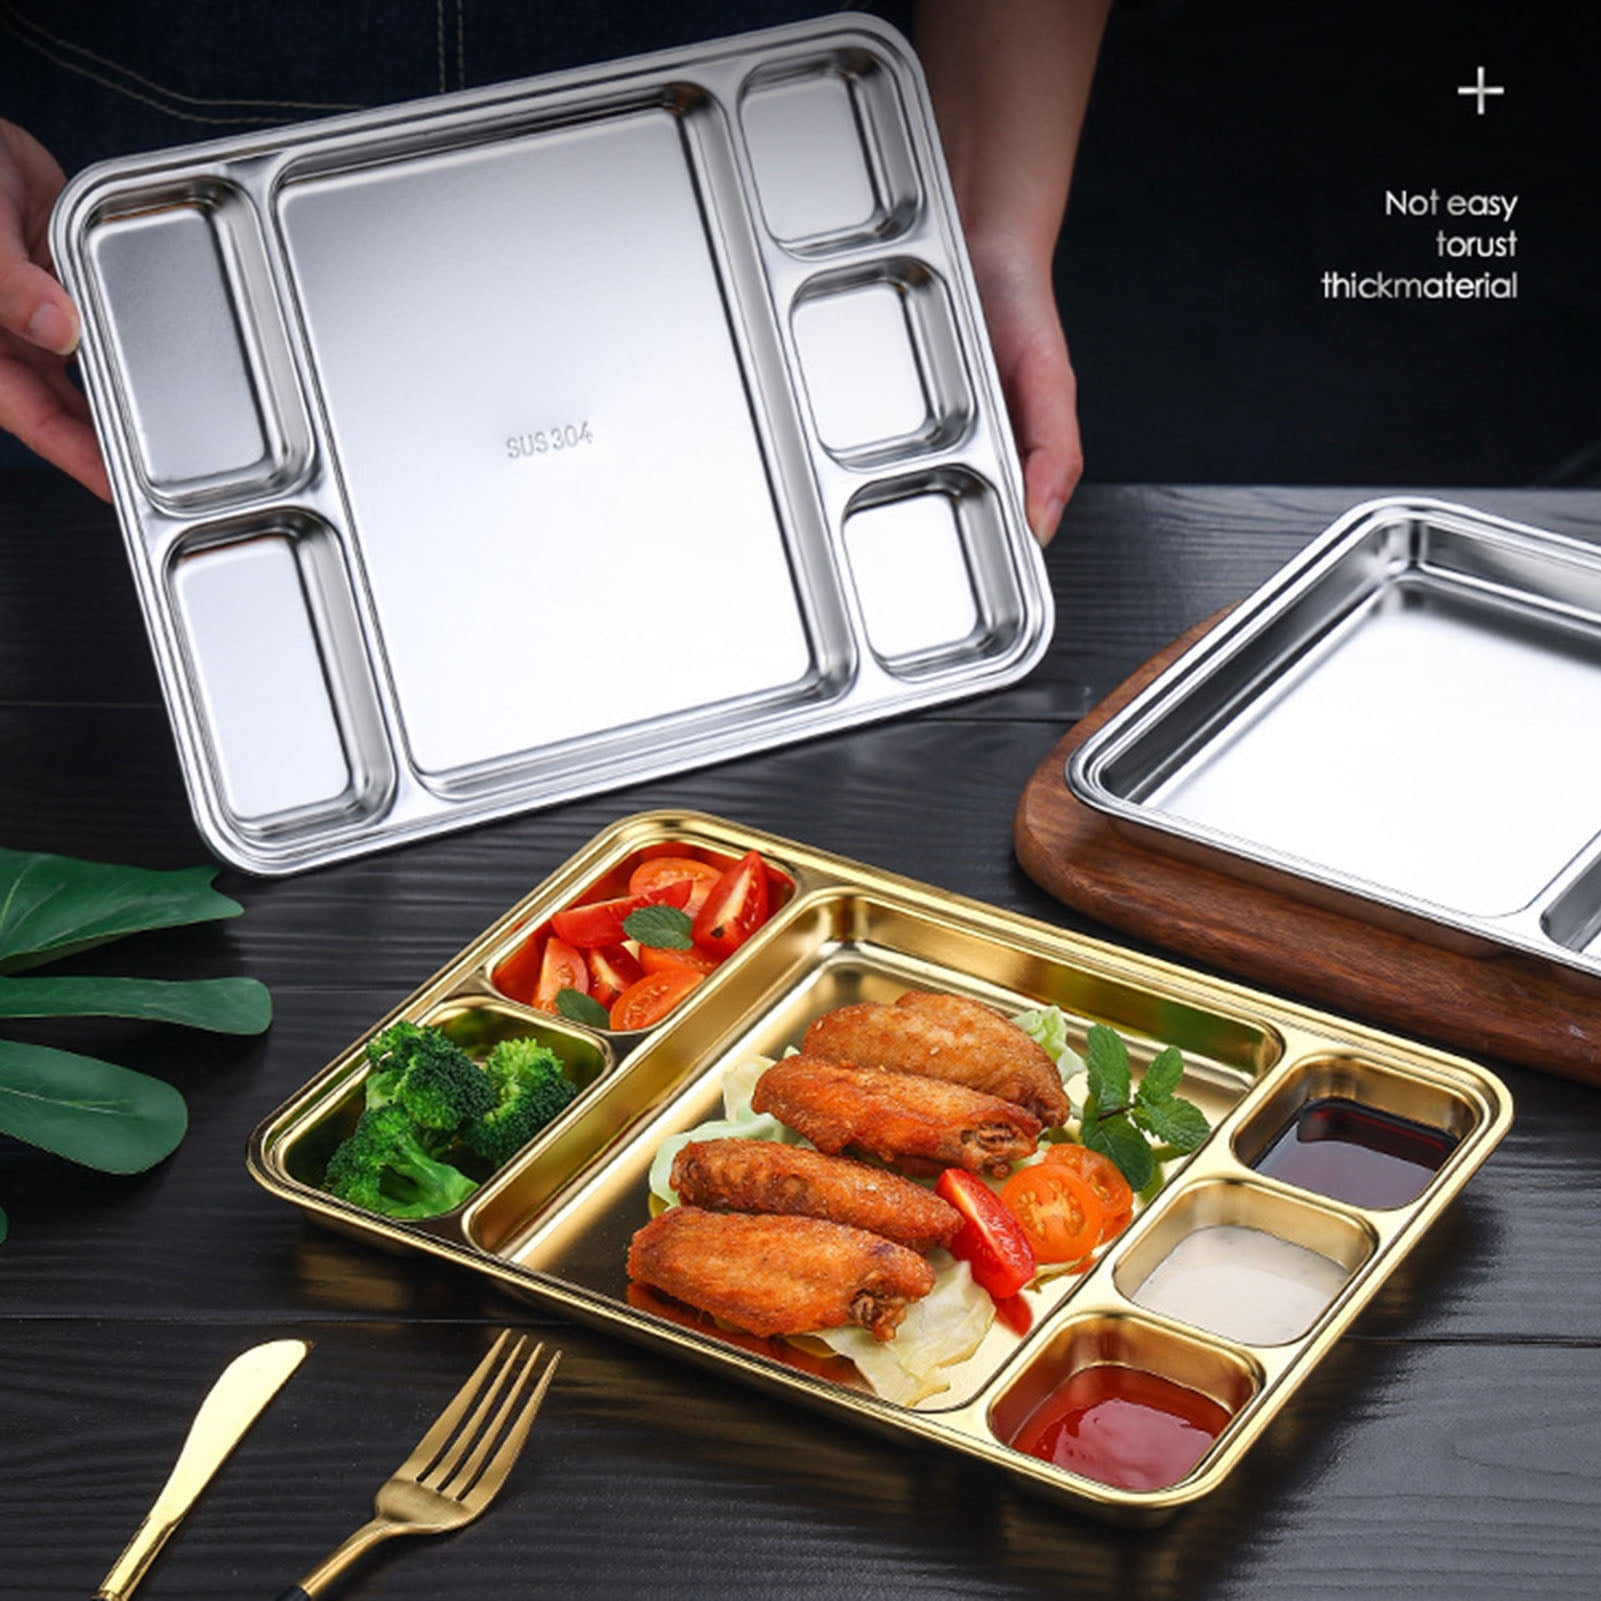 Travelwant Large 6 Compartment Cafeteria Food Tray, Cafeteria Eating Mess  Tray, Heavy Duty Divided Dinner Plate for Travel, Picnic - Silver 